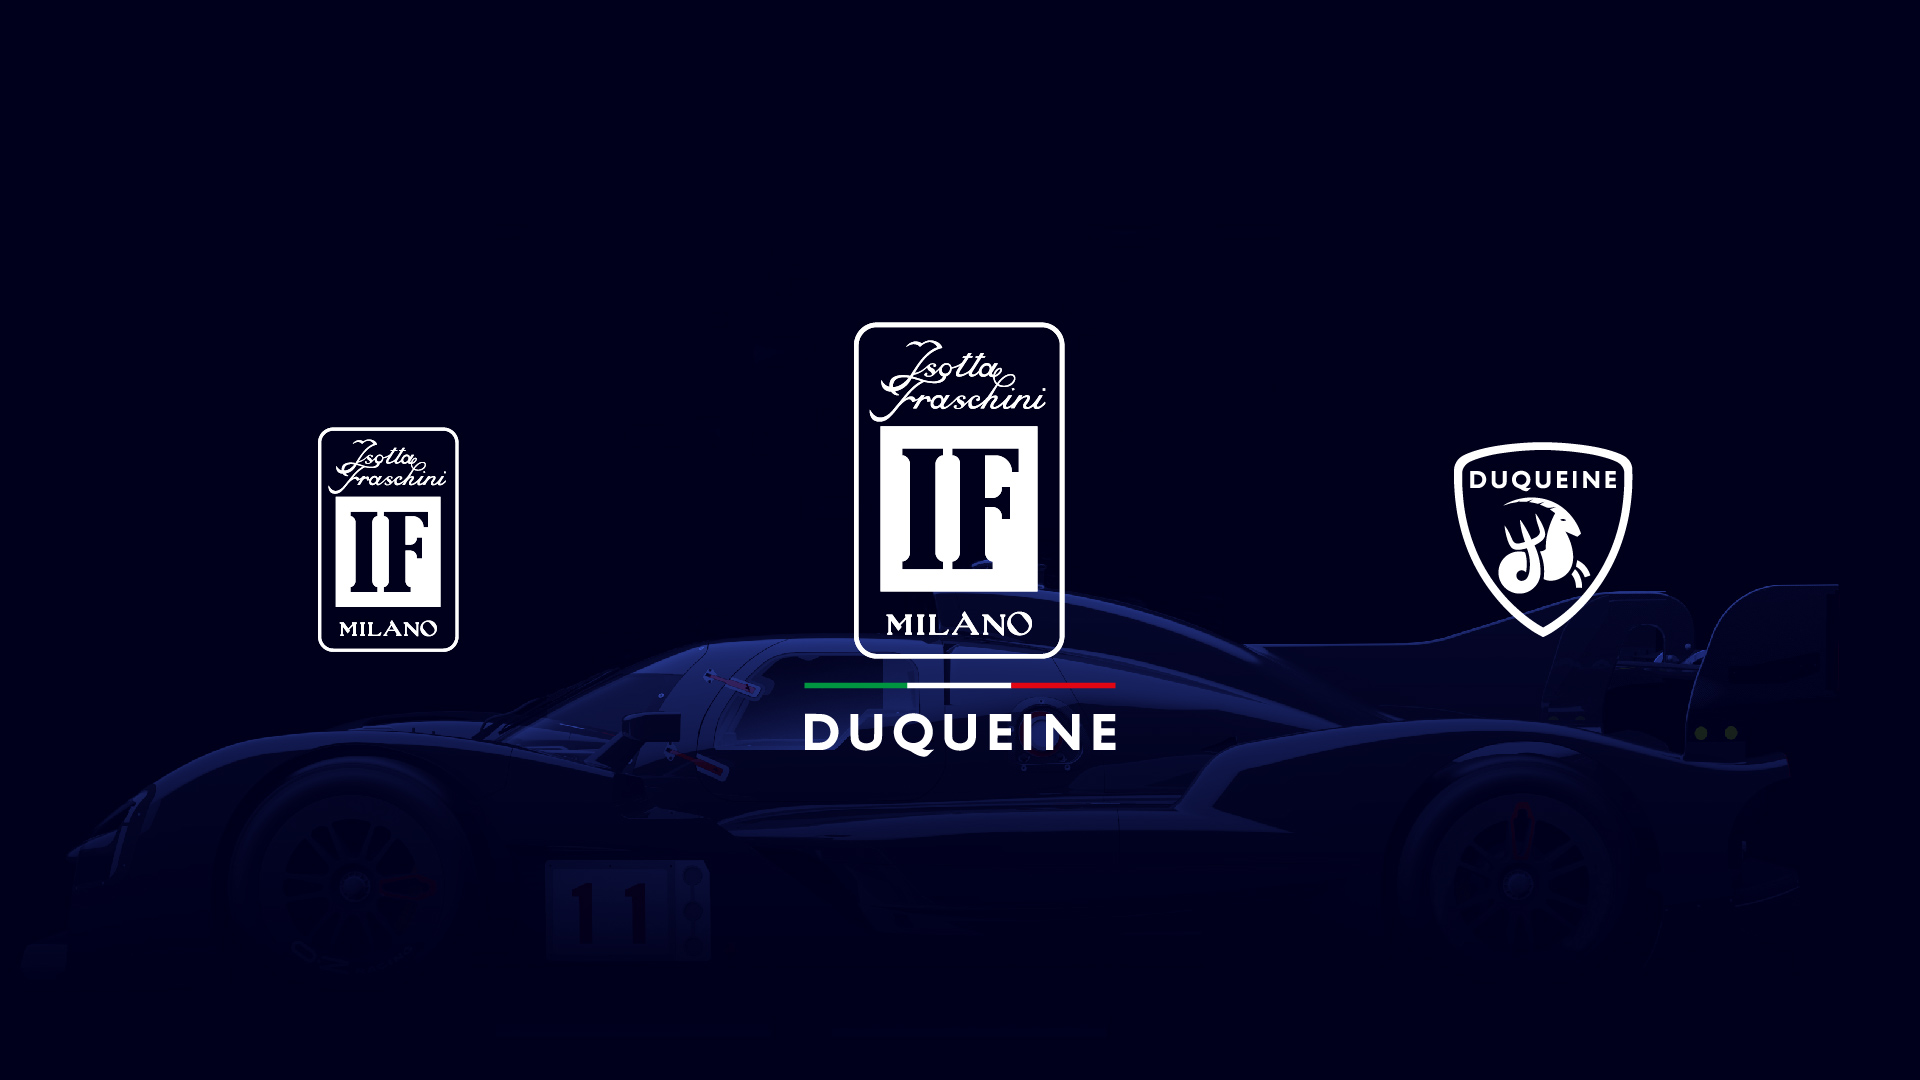 DUQUEINE TEAM ALONGSIDE ISOTTA FRASCHINI IN FIA WEC 2024 WITH THE NEW HYPERCAR TIPO 6 LMH – COMPETIZIONE